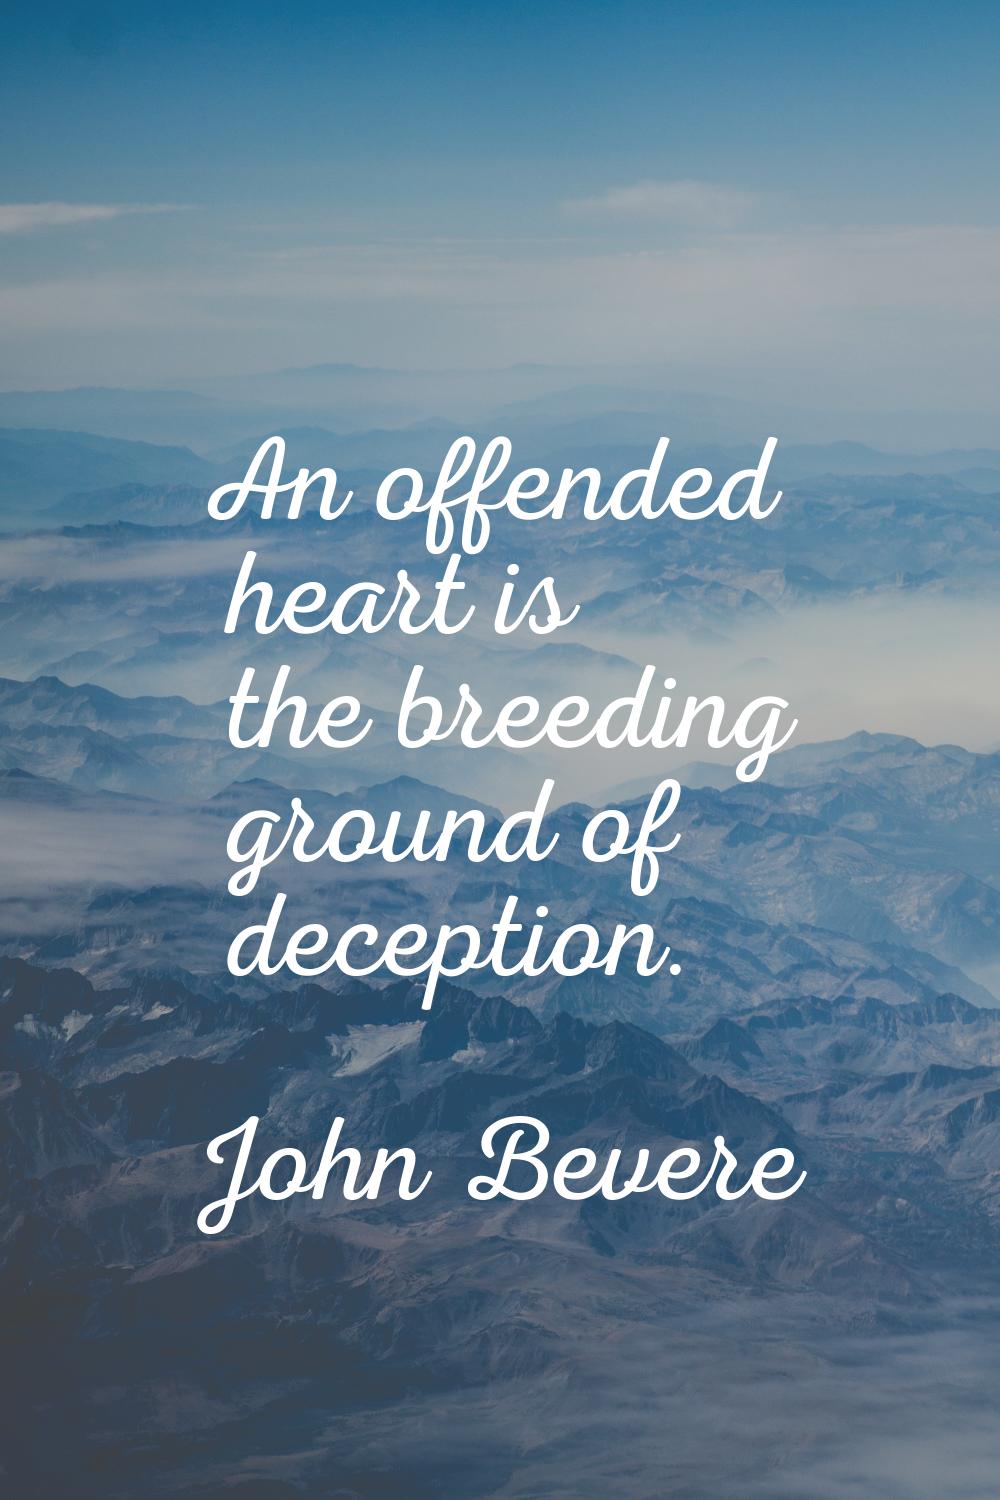 An offended heart is the breeding ground of deception.